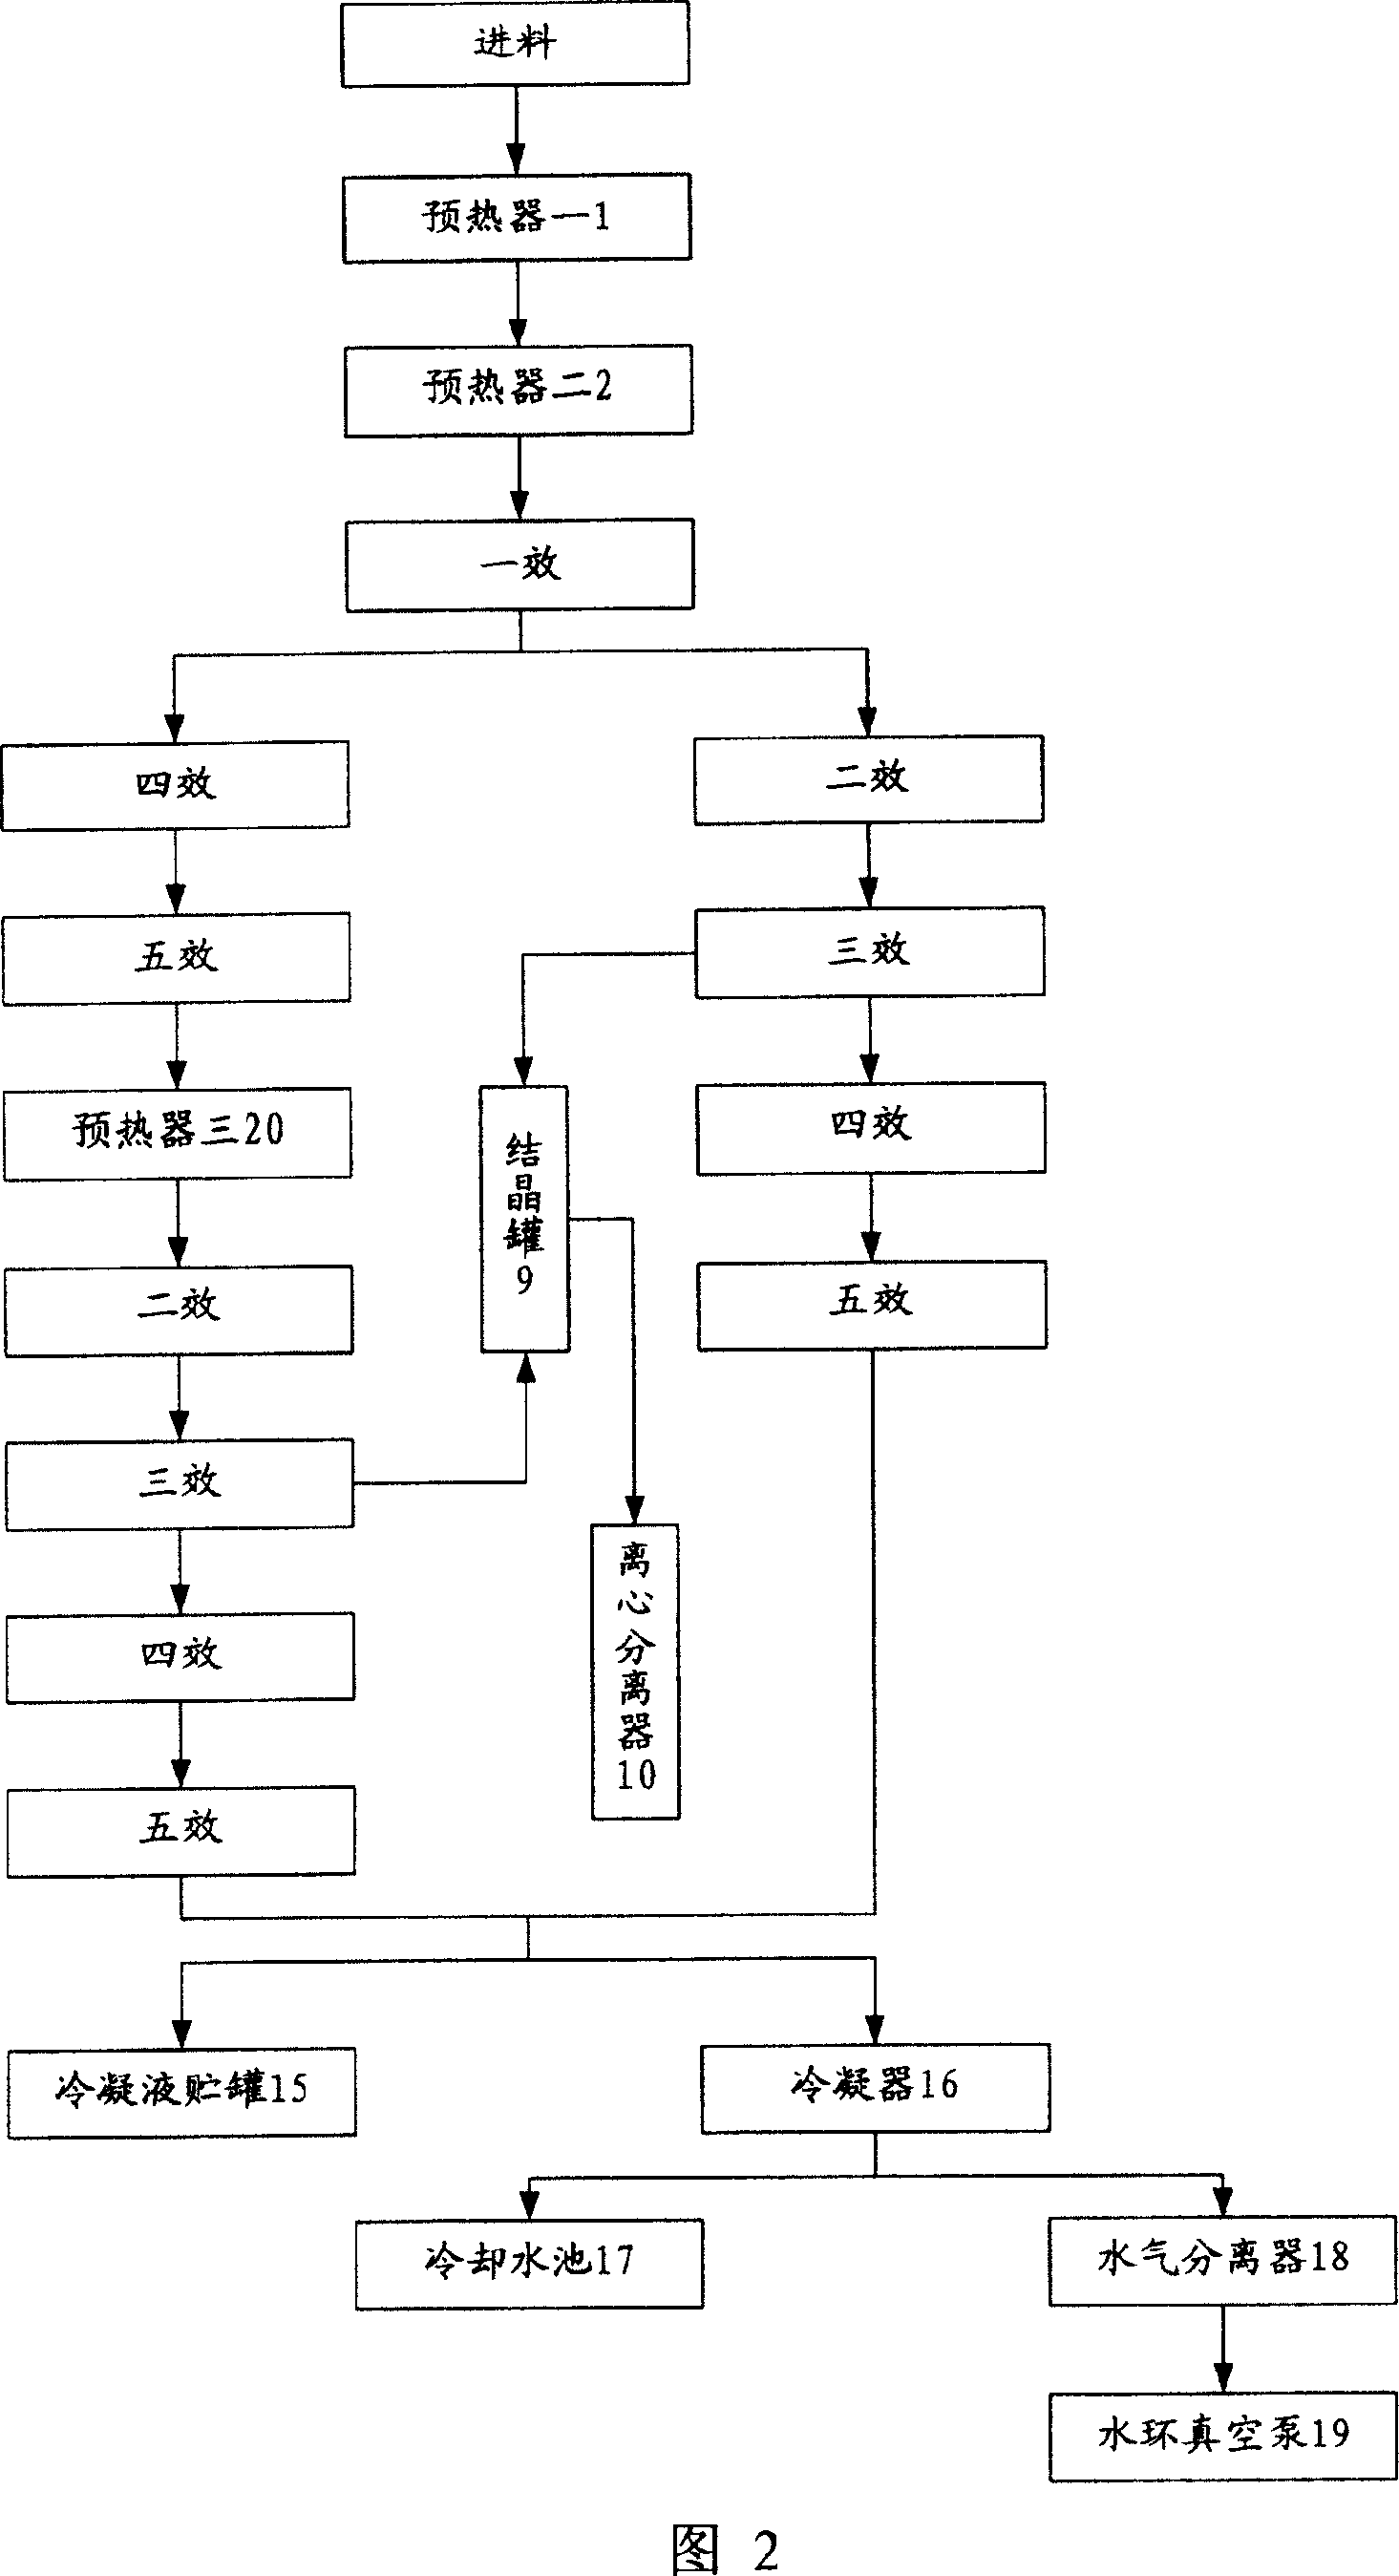 Waste water treating method and multi-effect evaporator for propylene oxide production